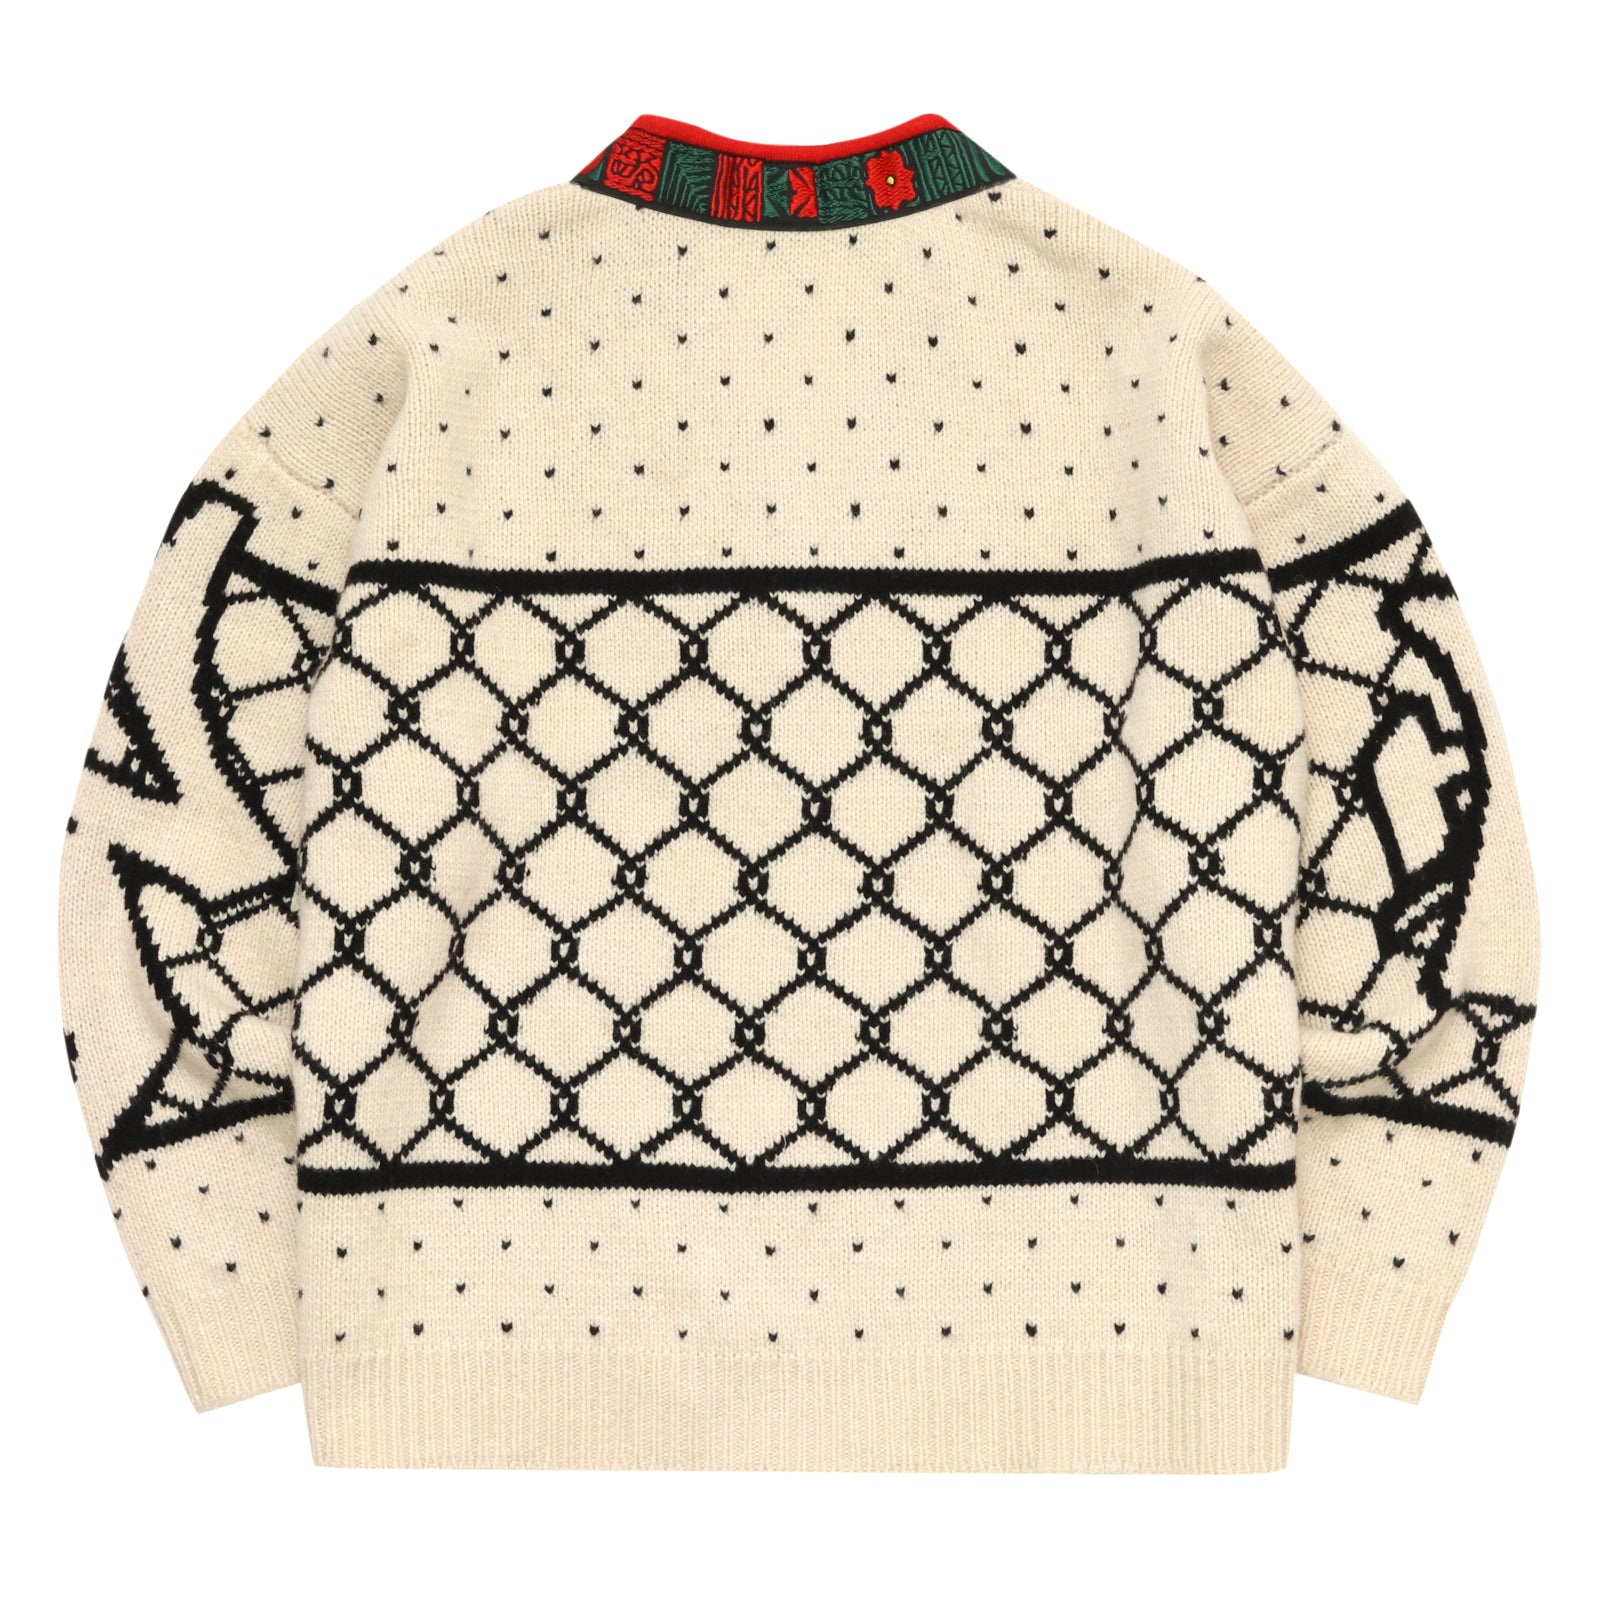 WHIMSY/ Tyrolean Sweater